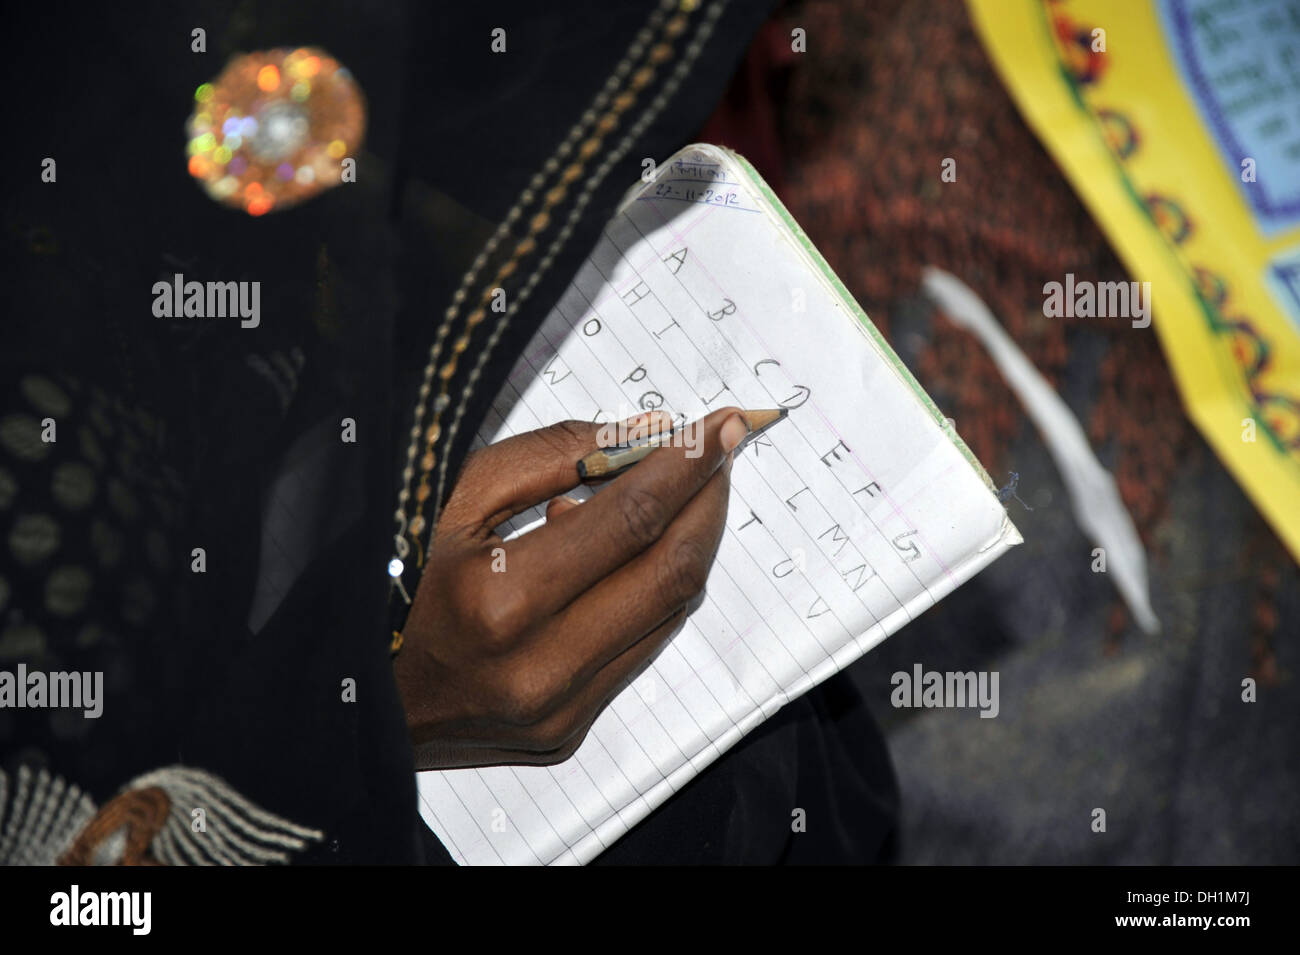 adult education woman writing A B C D pencil note book India Stock Photo